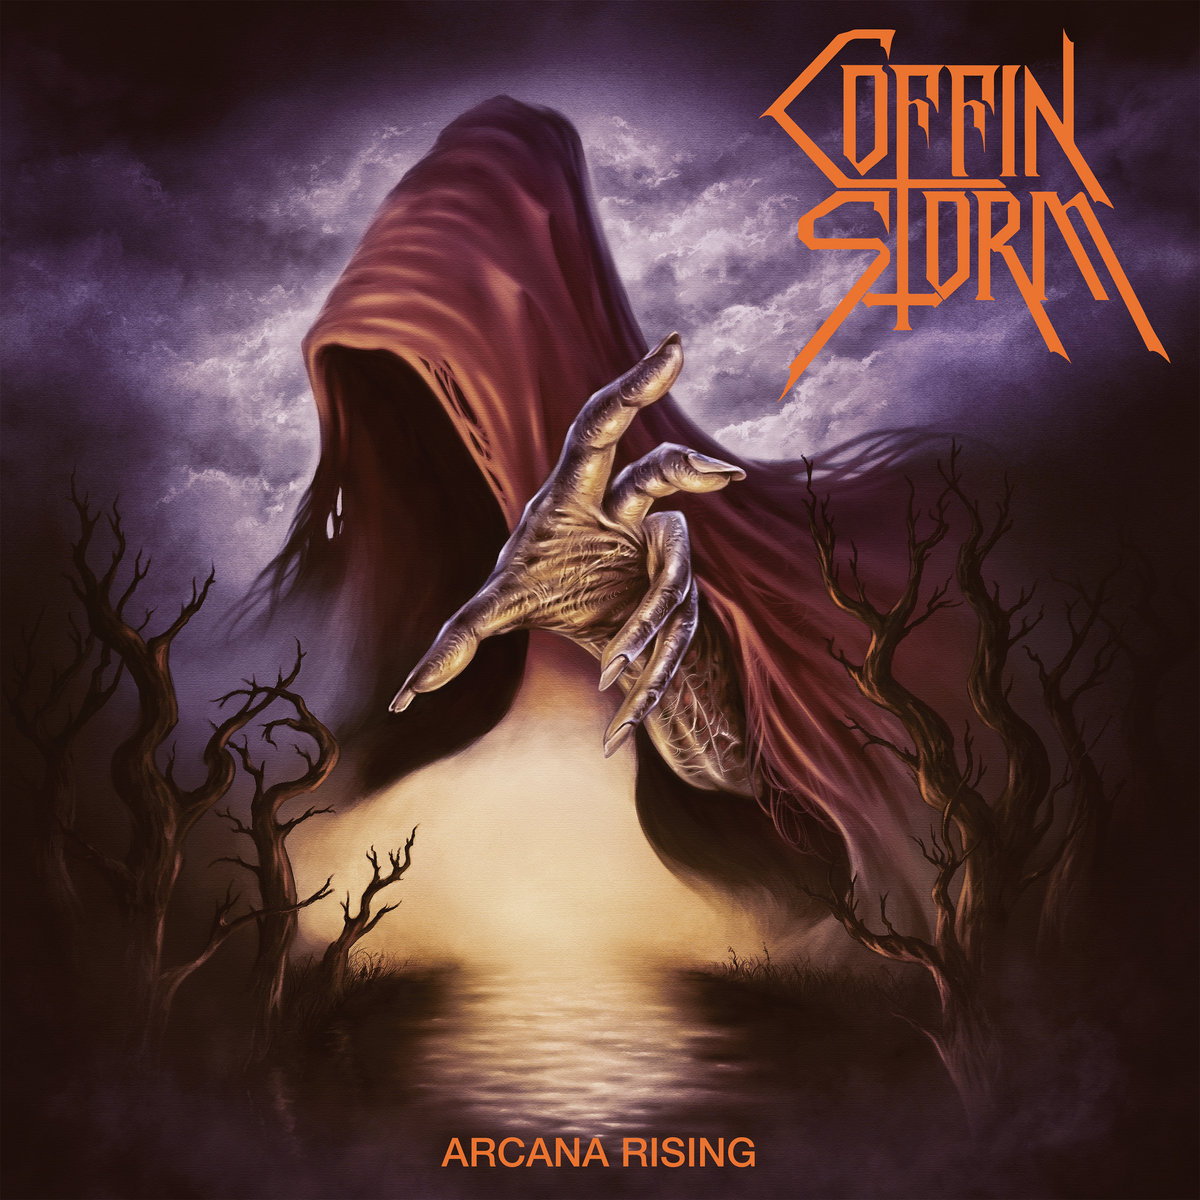 Coffin Storm Summons Pure Metallic Delight on “Arcana Rising” (Review + Interview)